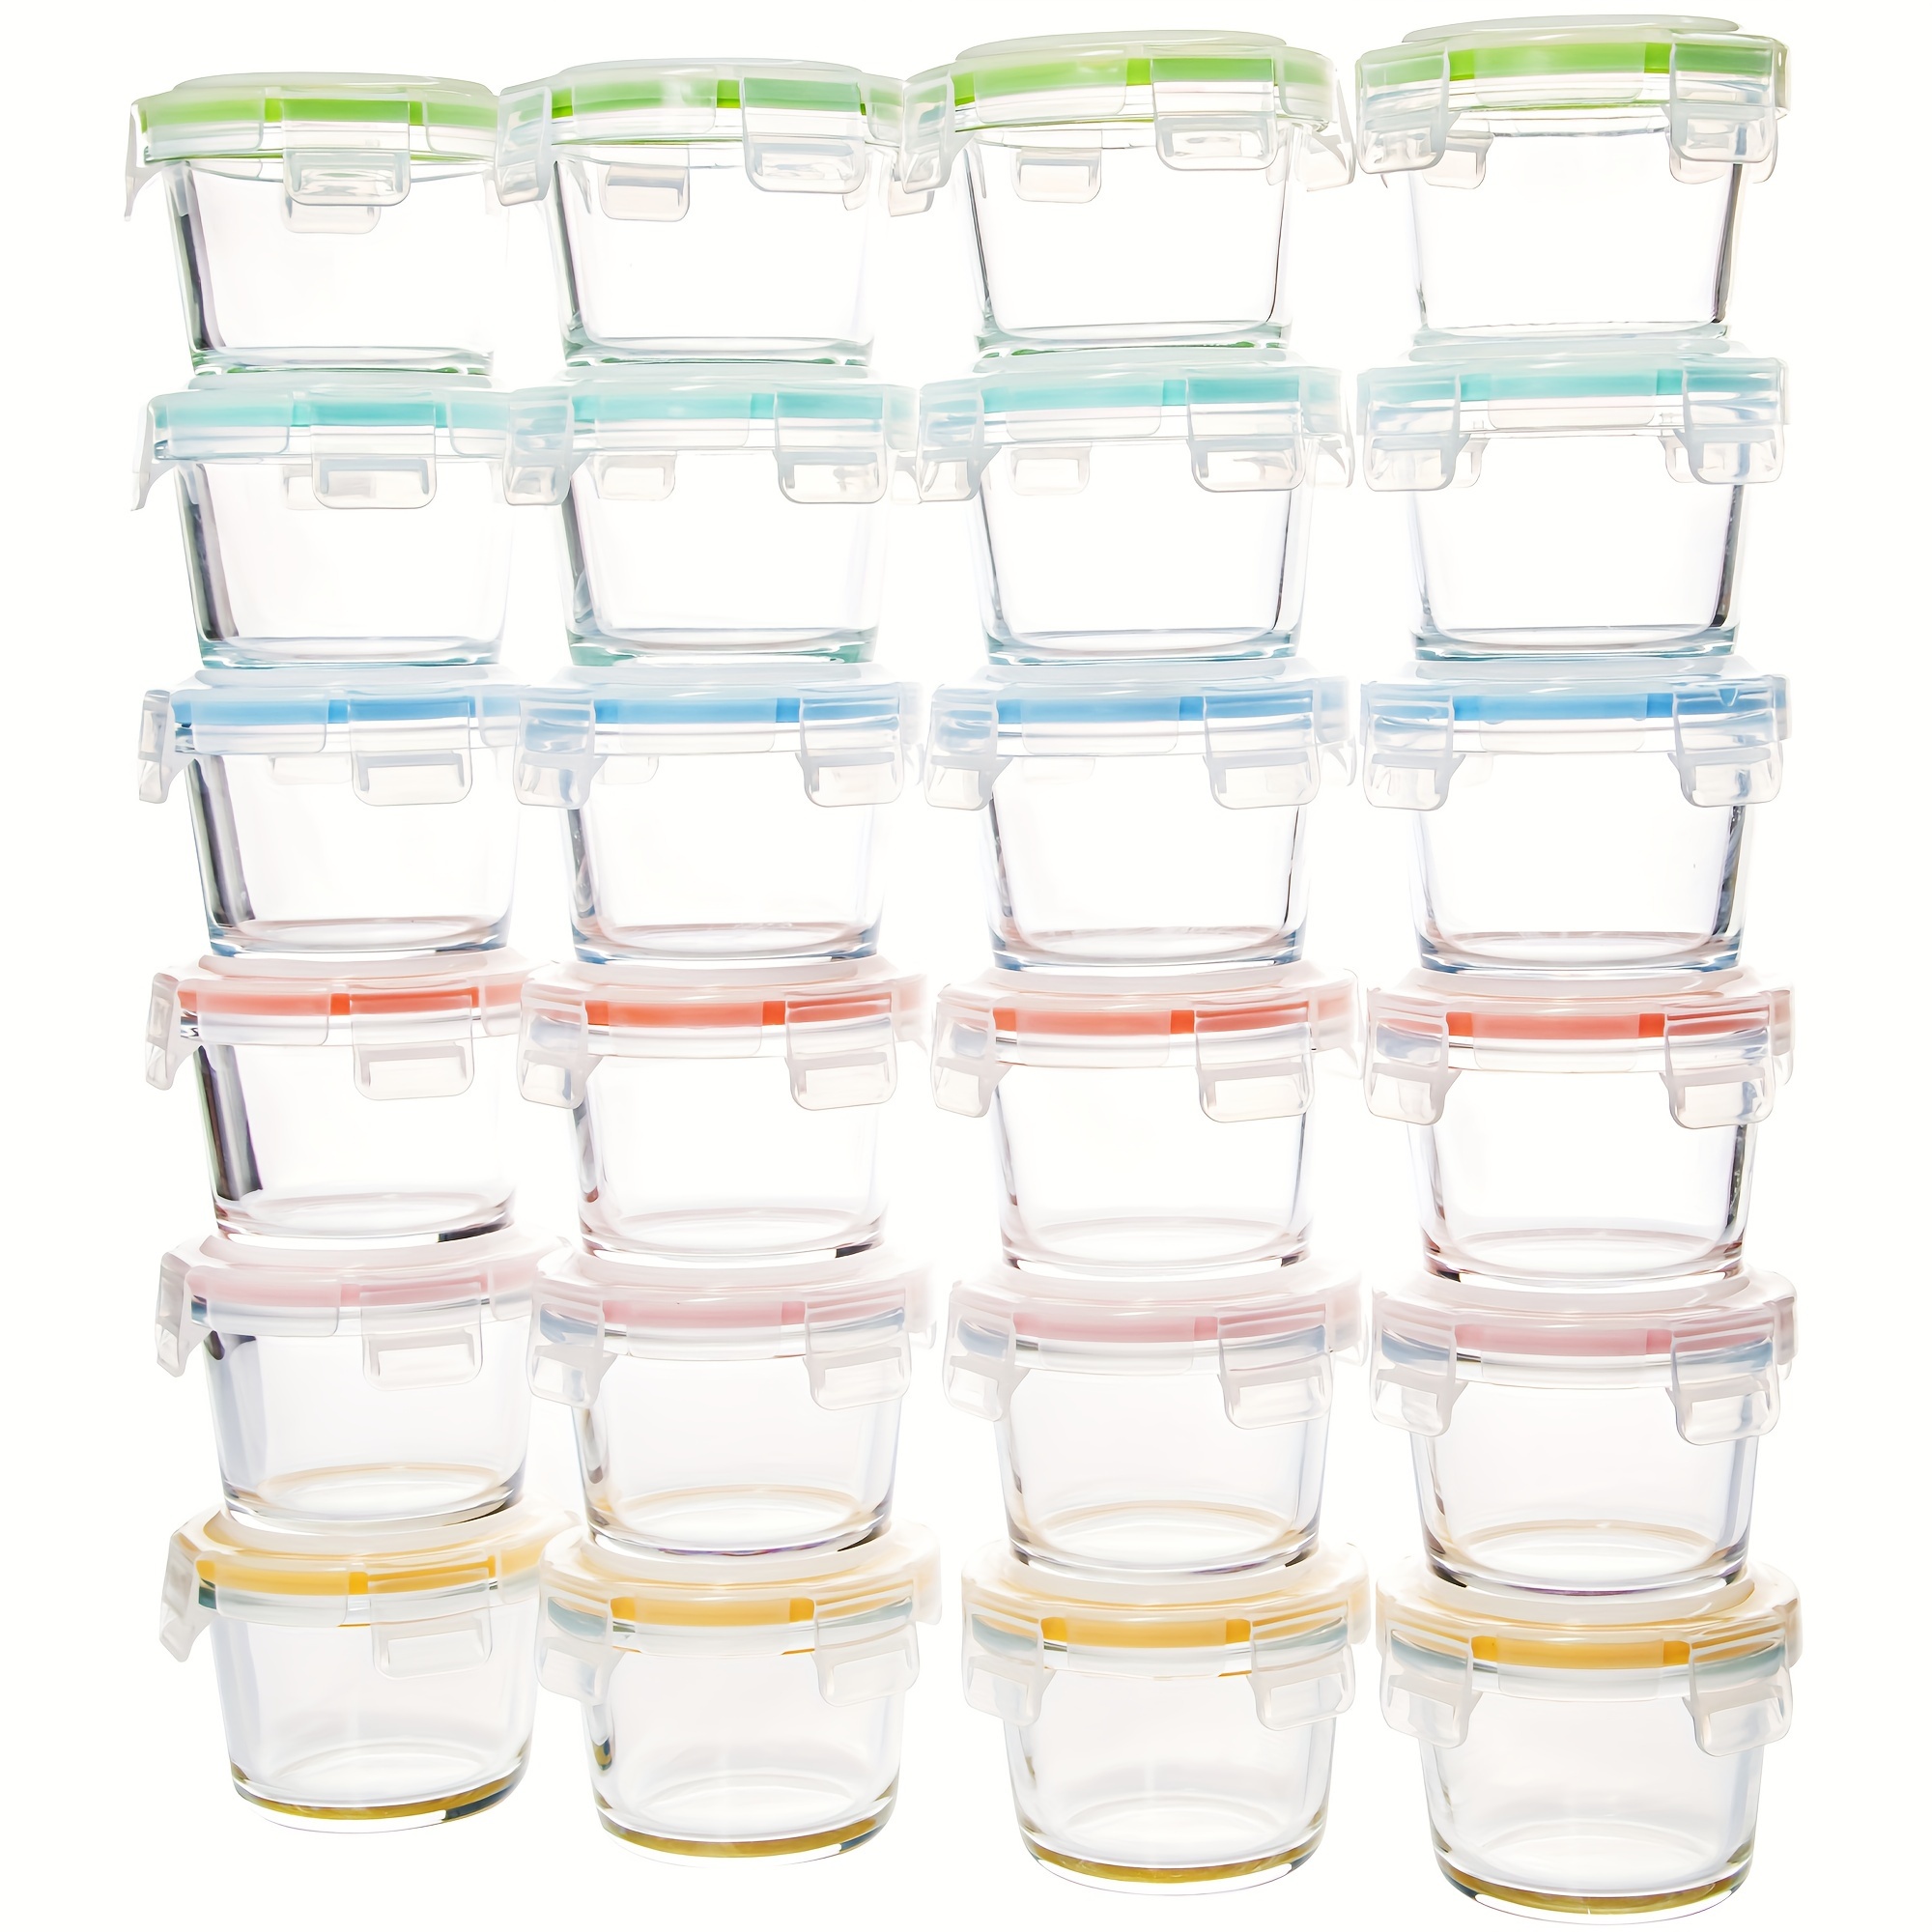 

24 Pack Round Glass Food Storage Containers, 5 Oz Small Containers With Locking Lids, Airtight Glass Food Jars For Food Portion, Snacks